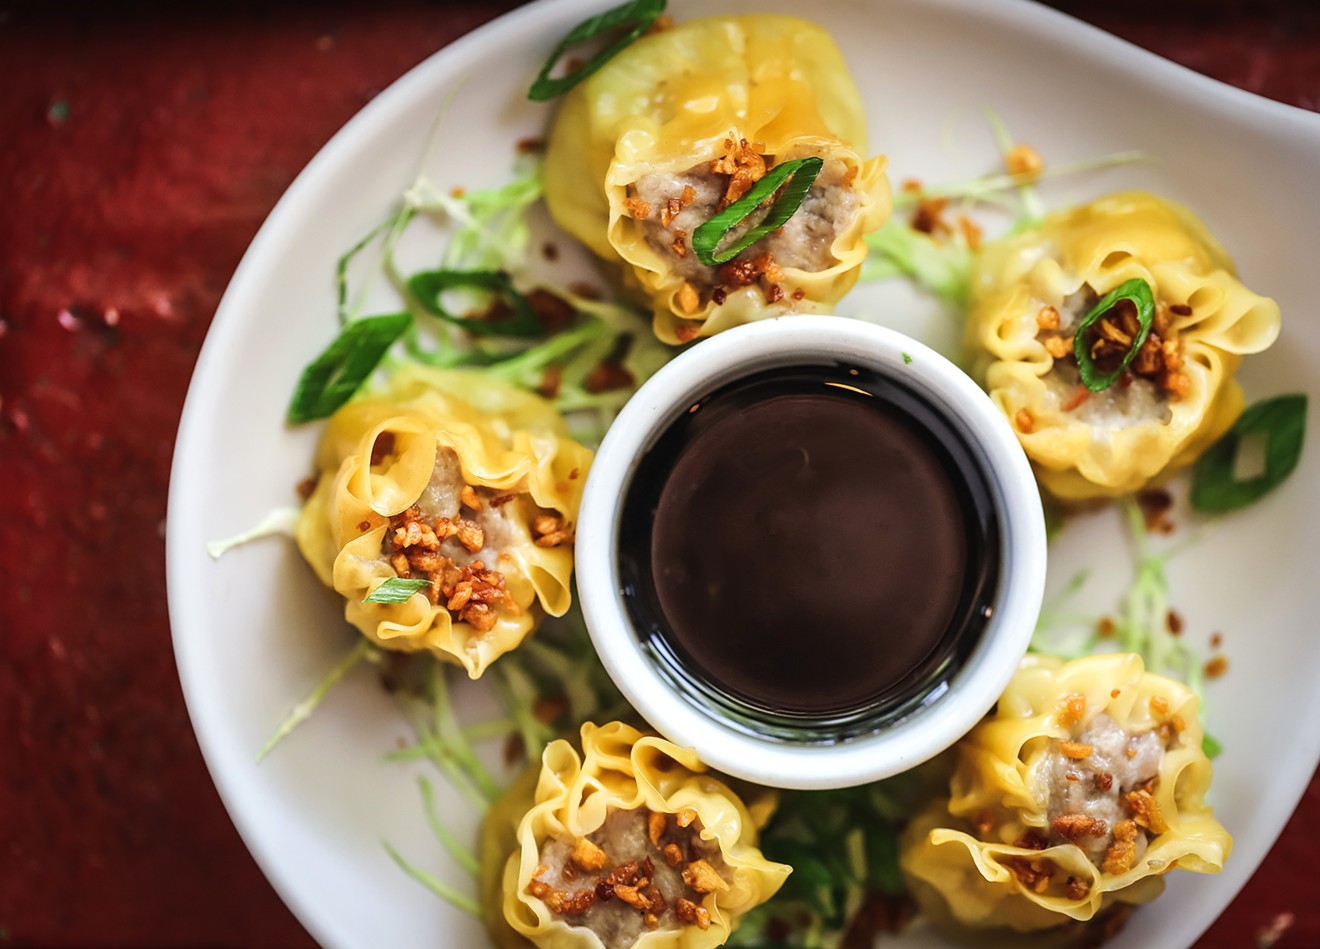 The dumplings at Family Ties ($8.50) are steamed in wonton sheets and served with soy-vinegar sauce.